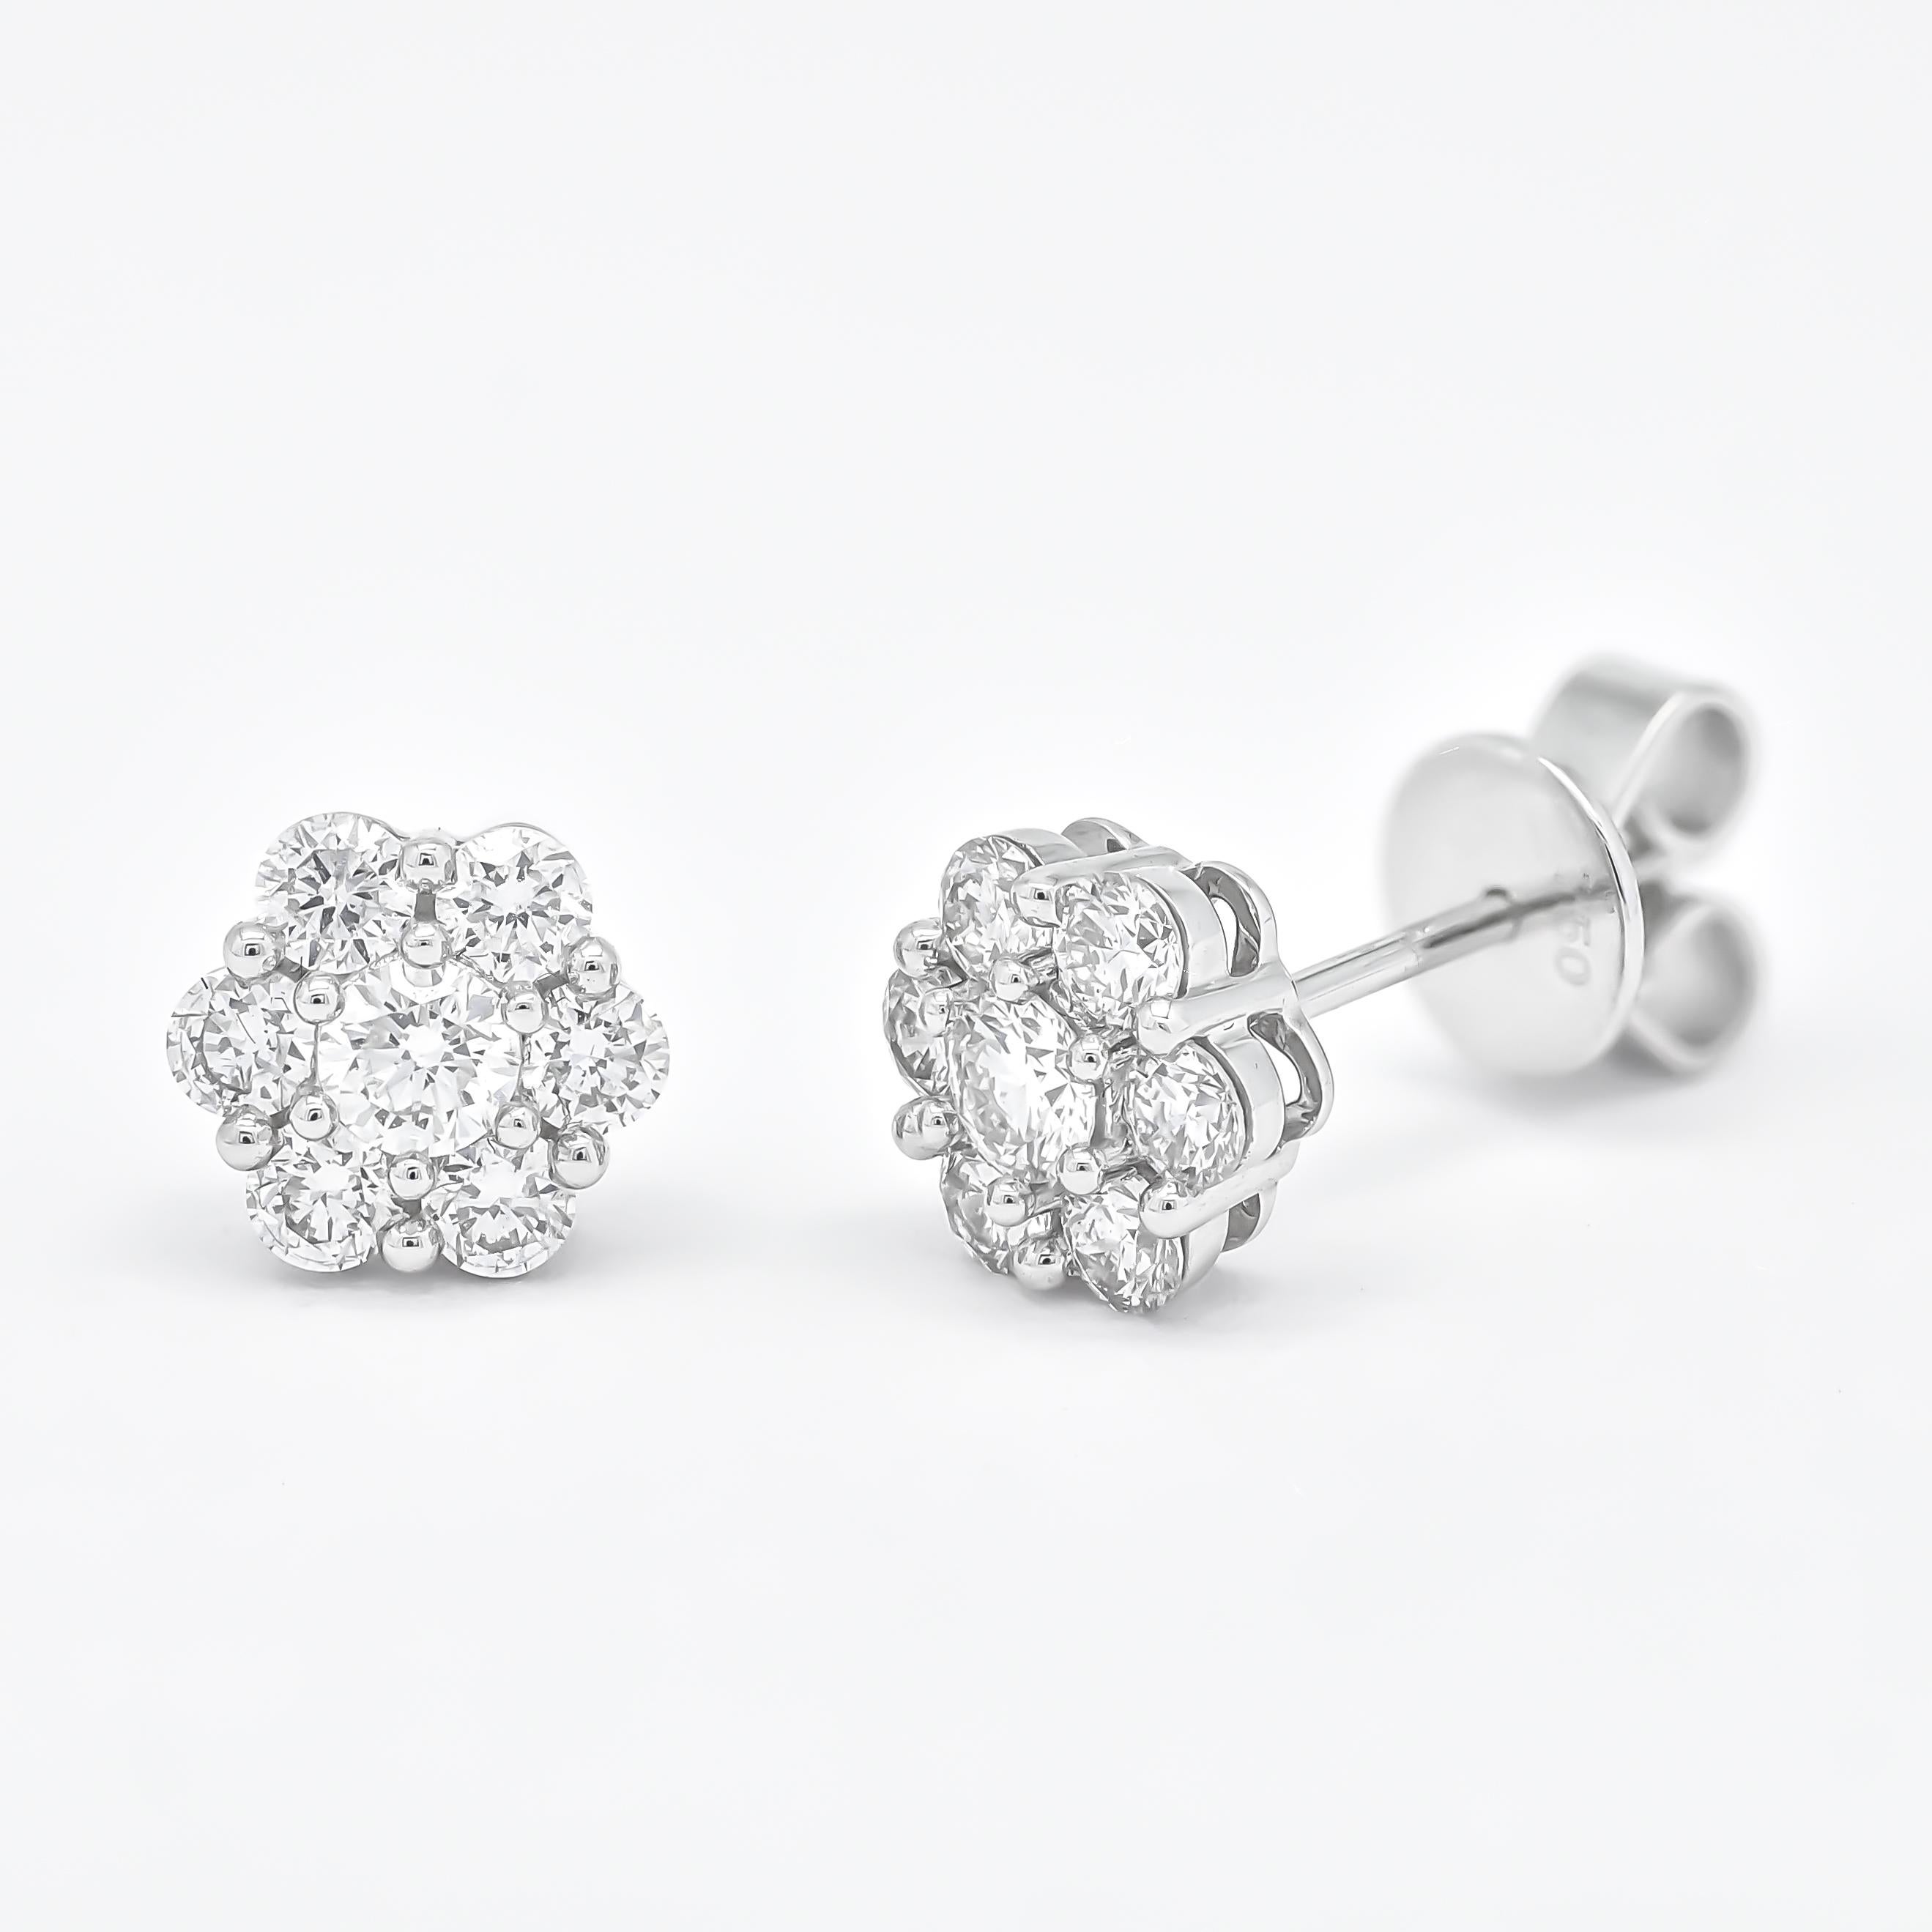 Indulge in the allure of timeless elegance with our exquisite 18kt white gold round diamond flower cluster earrings. Crafted with meticulous attention to detail, these earrings embody the epitome of luxury and sophistication.

Radiating a